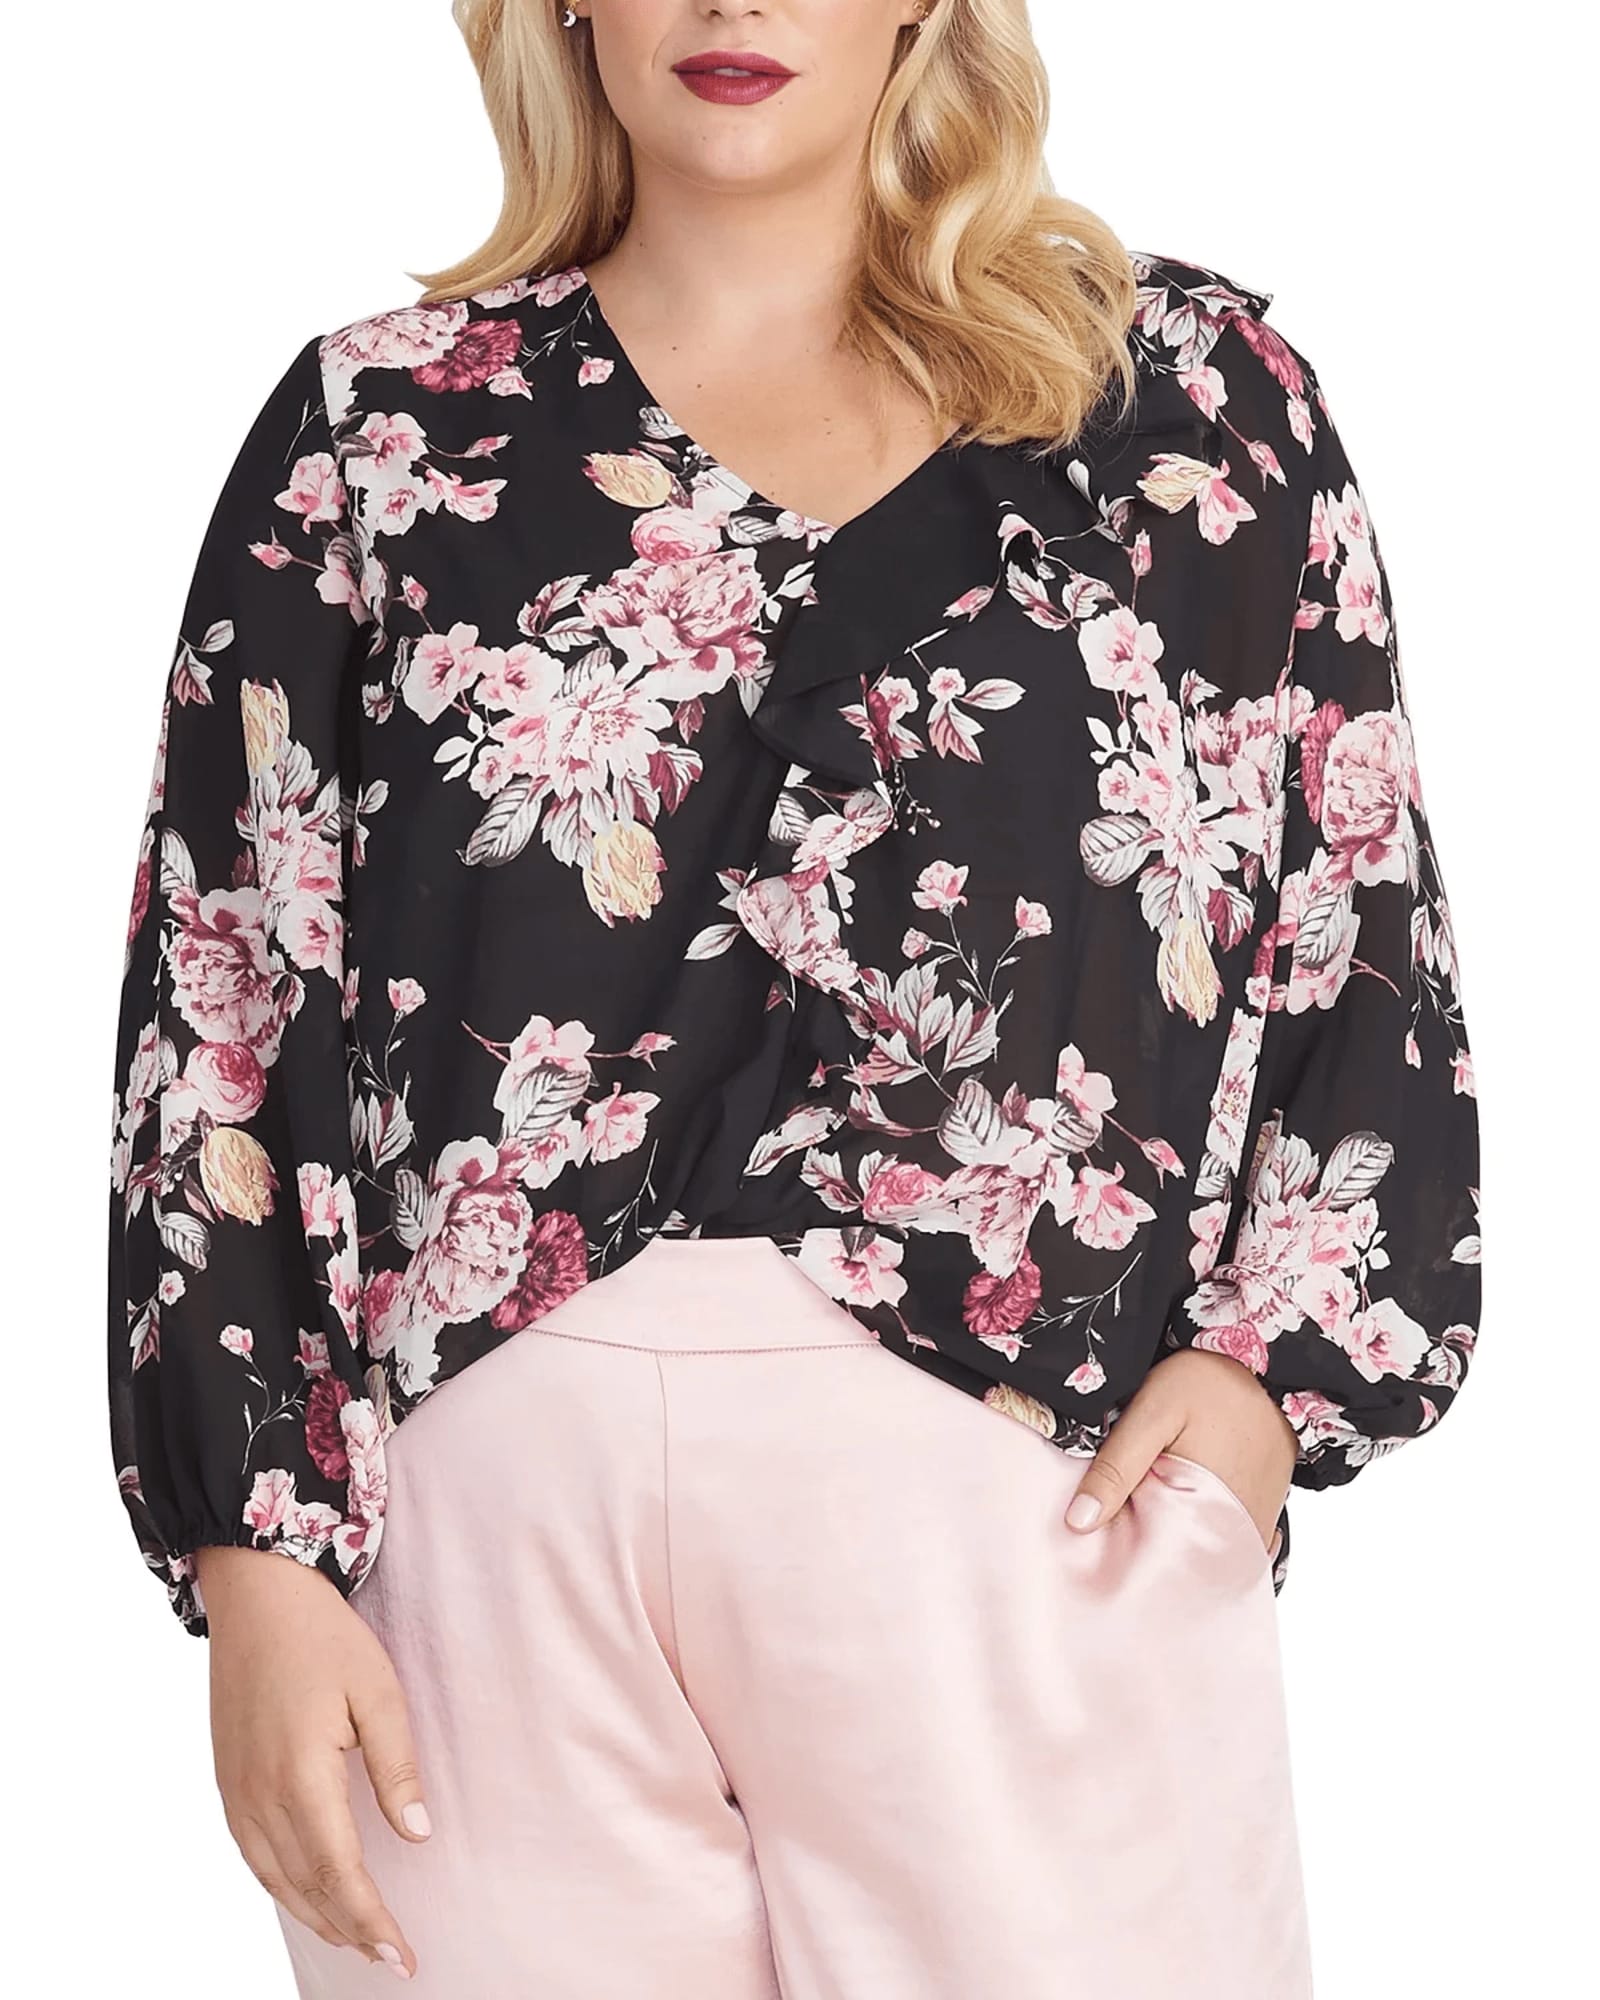 Plus Size Going Out & Party Tops